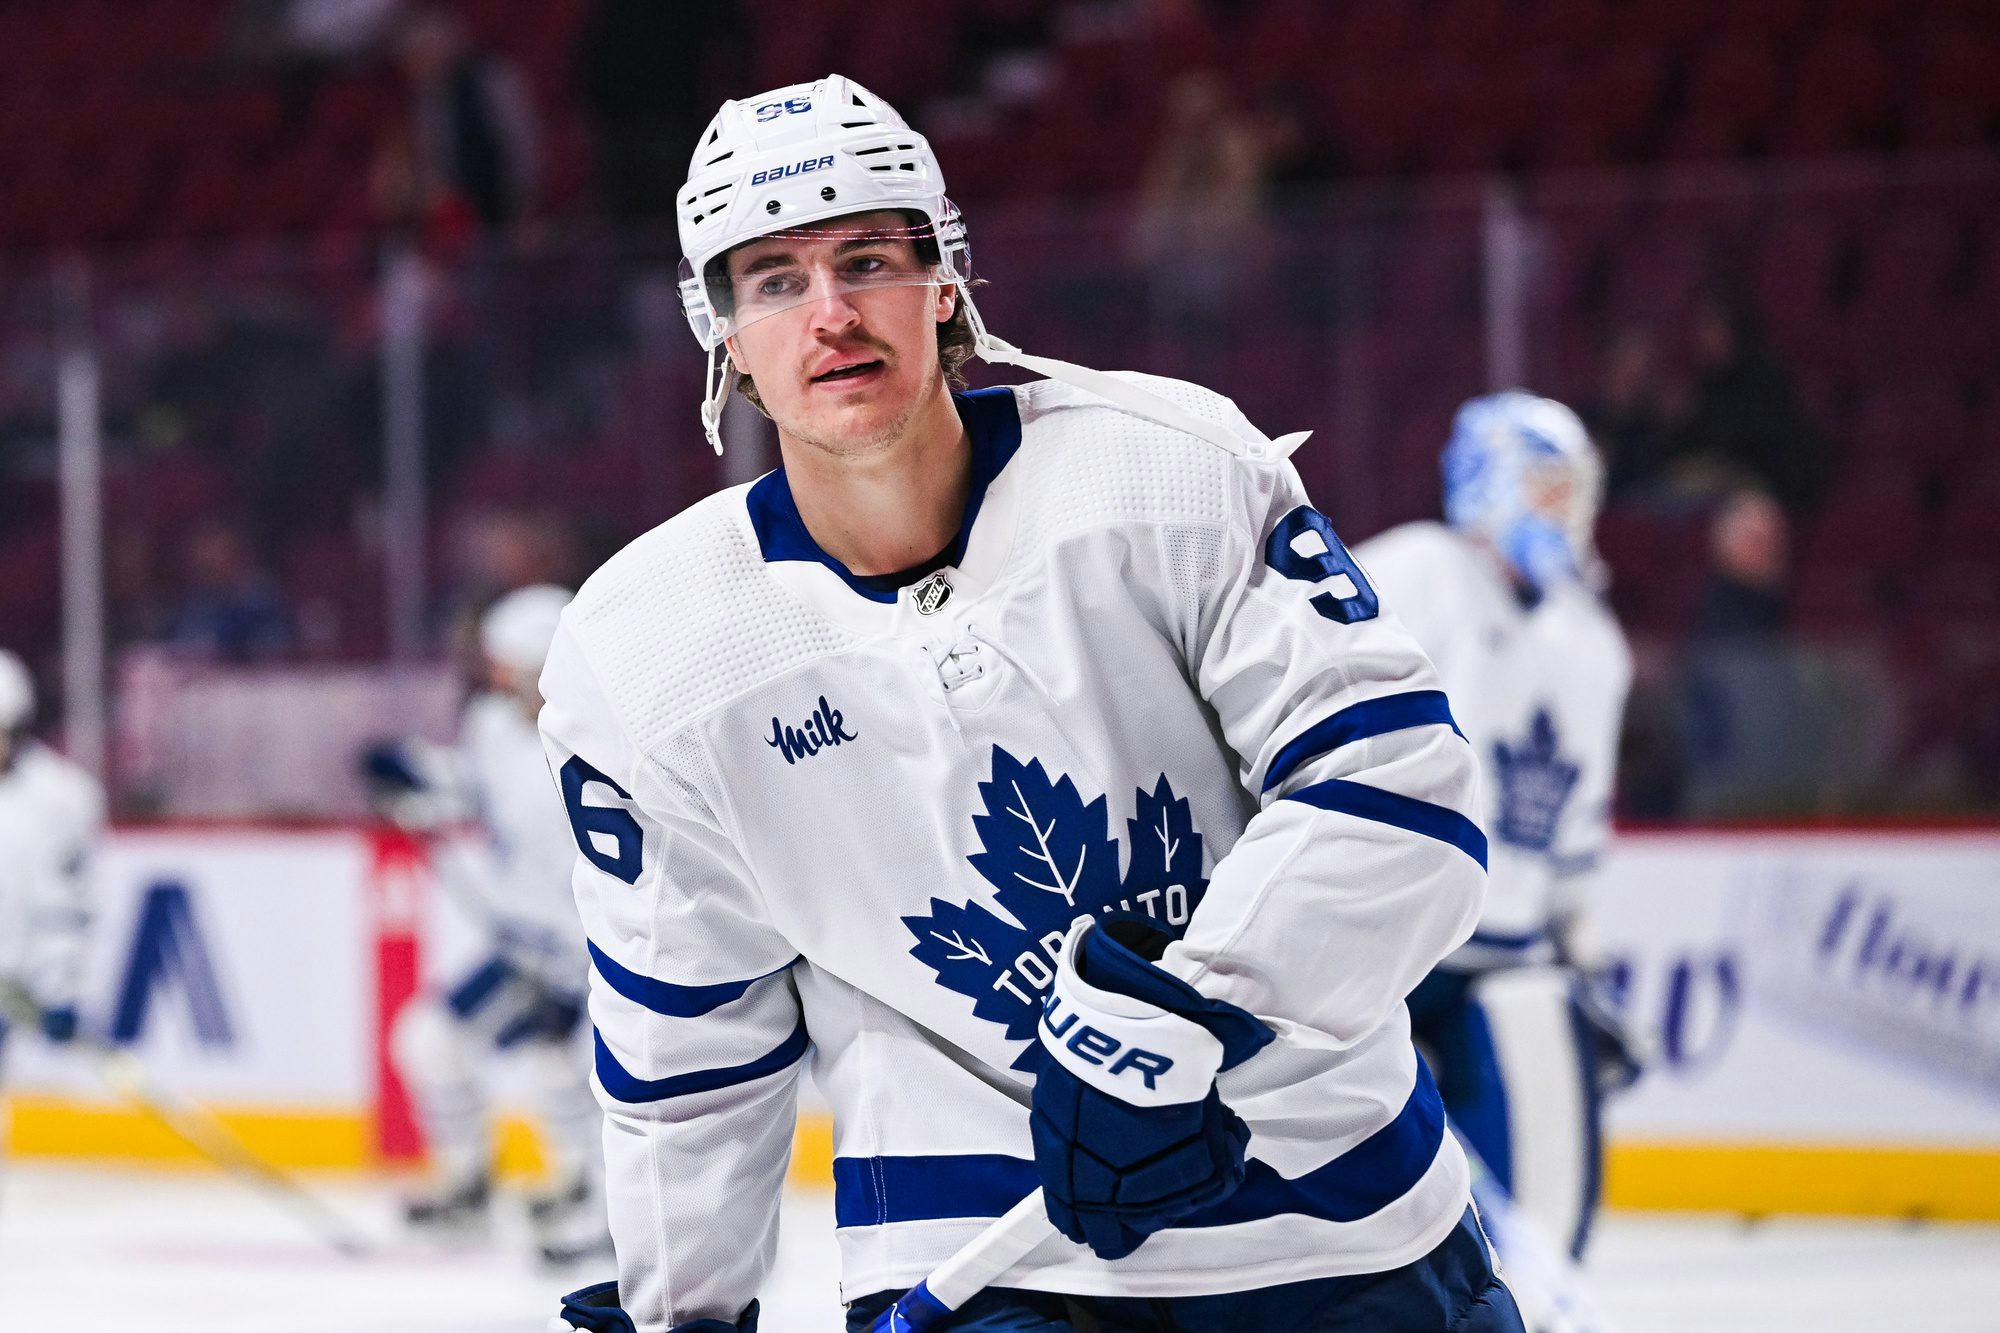 Nicolas Aube-Kubel Will Be a “Hit” With the Maple Leafs - BVM Sports